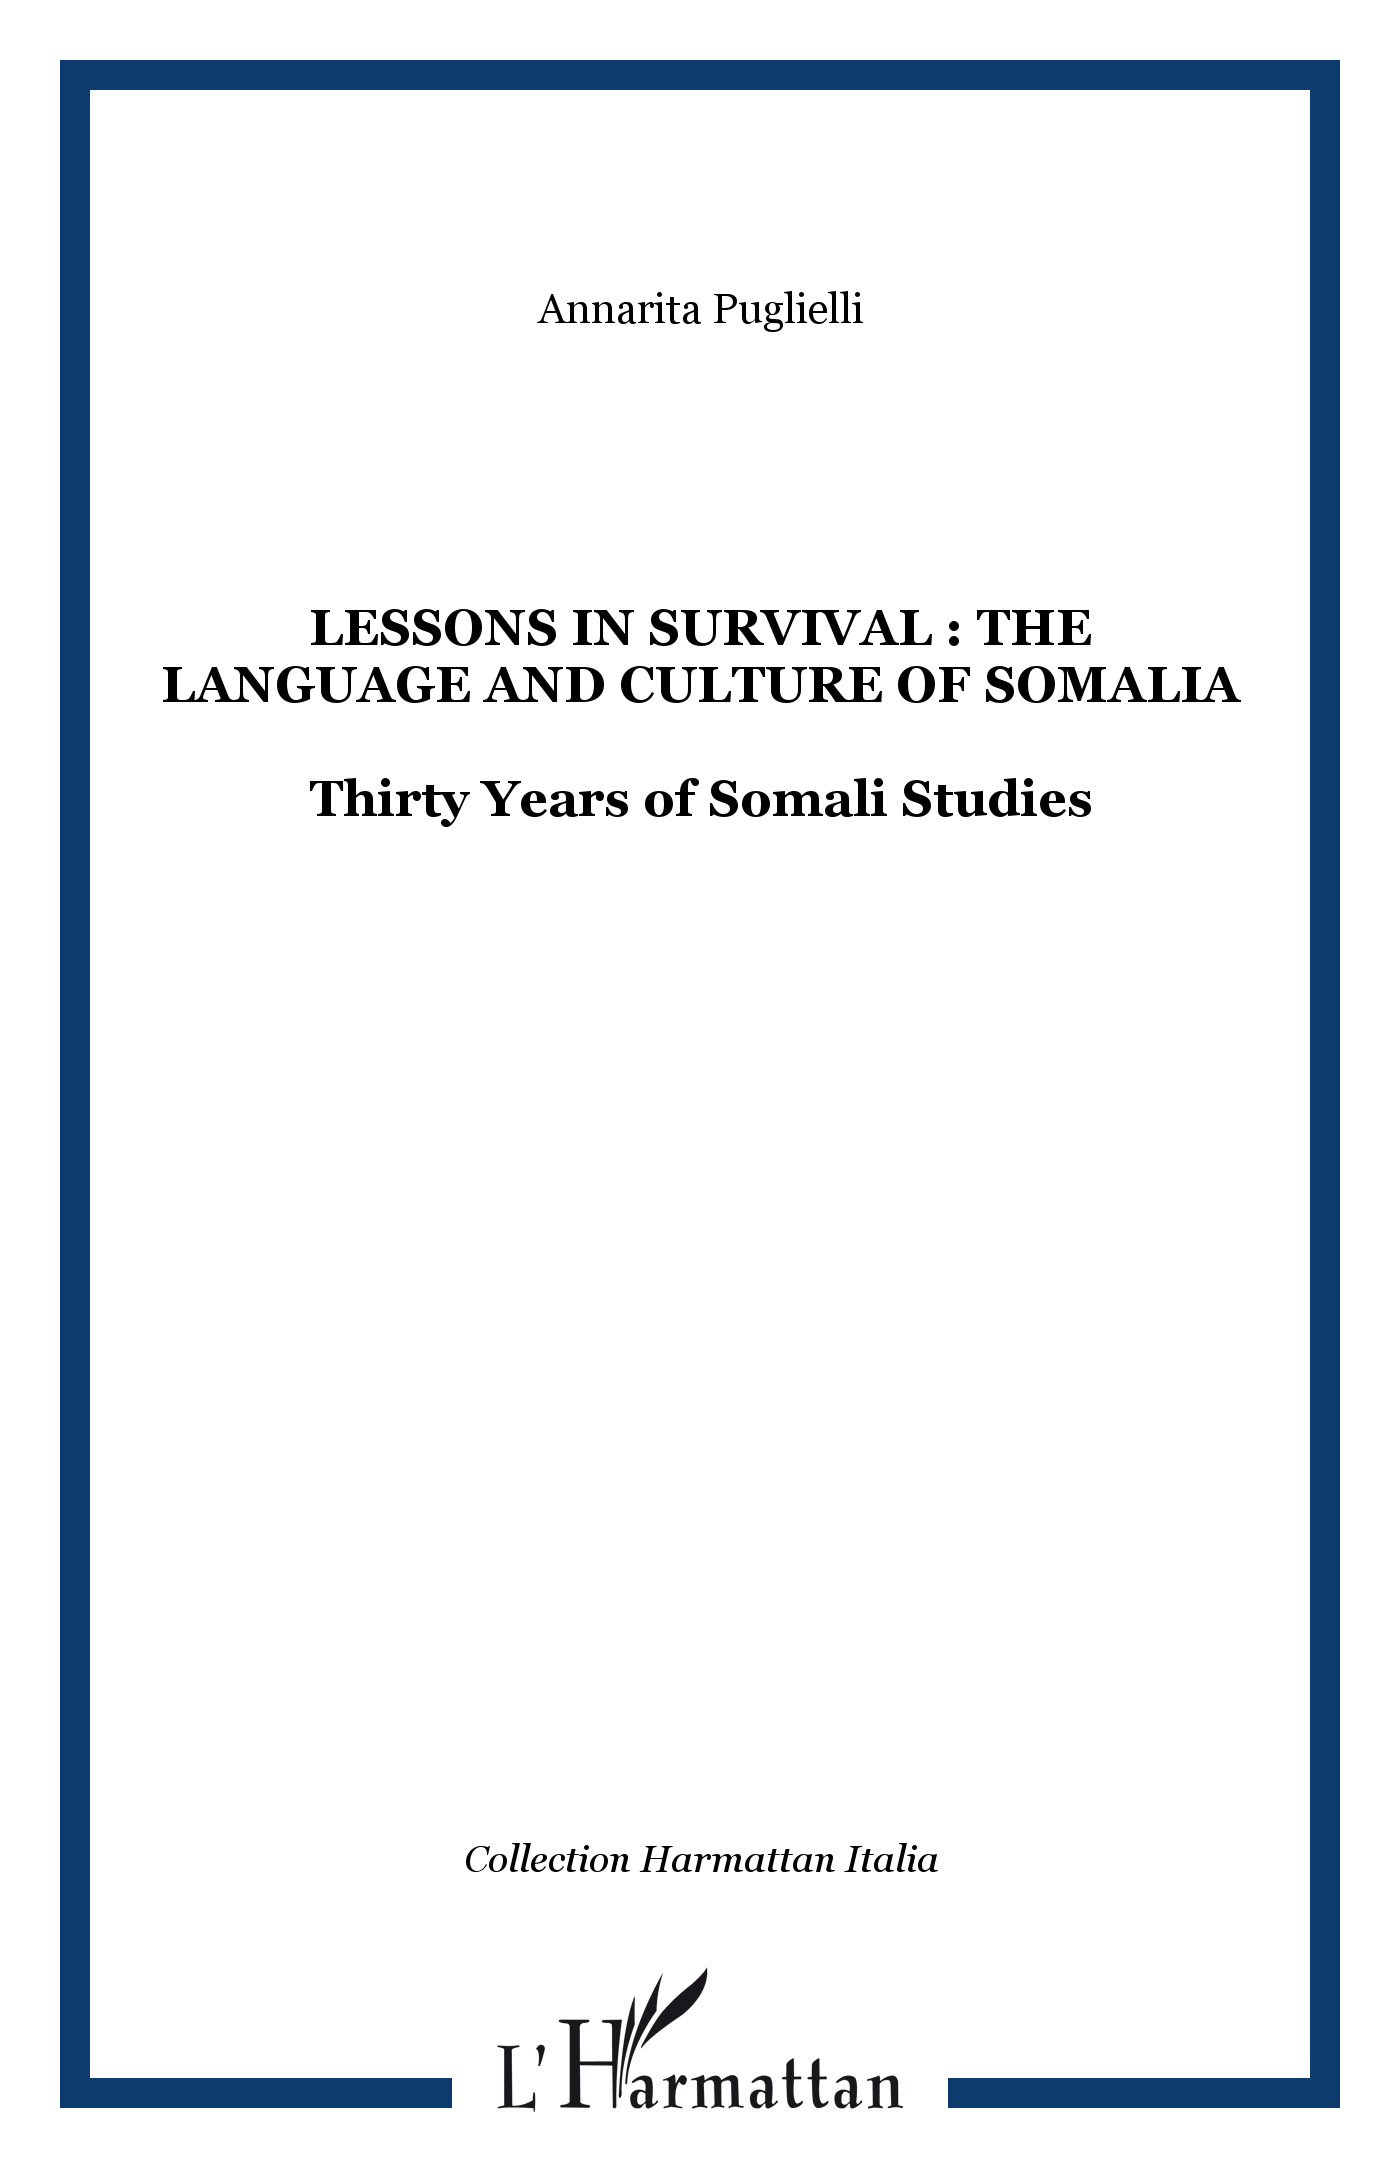 Lessons in survival : the language and culture of Somalia, Thirty Years of Somali Studies (9782296093805-front-cover)